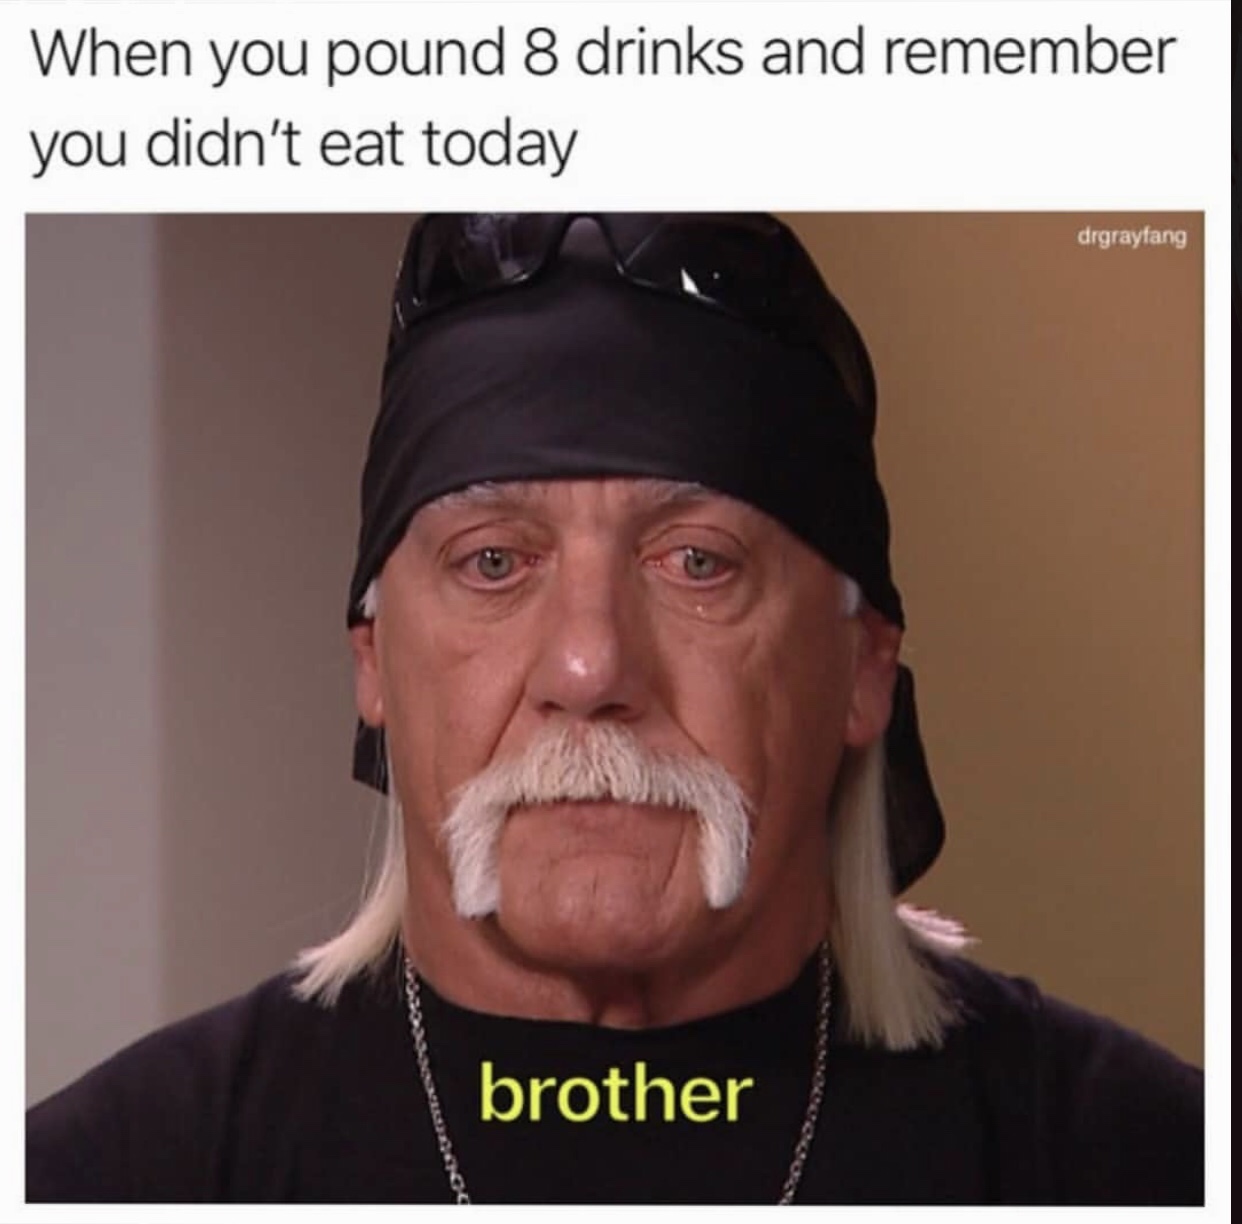 brother meme hulk hogan - When you pound 8 drinks and remember you didn't eat today drgrayfang brother